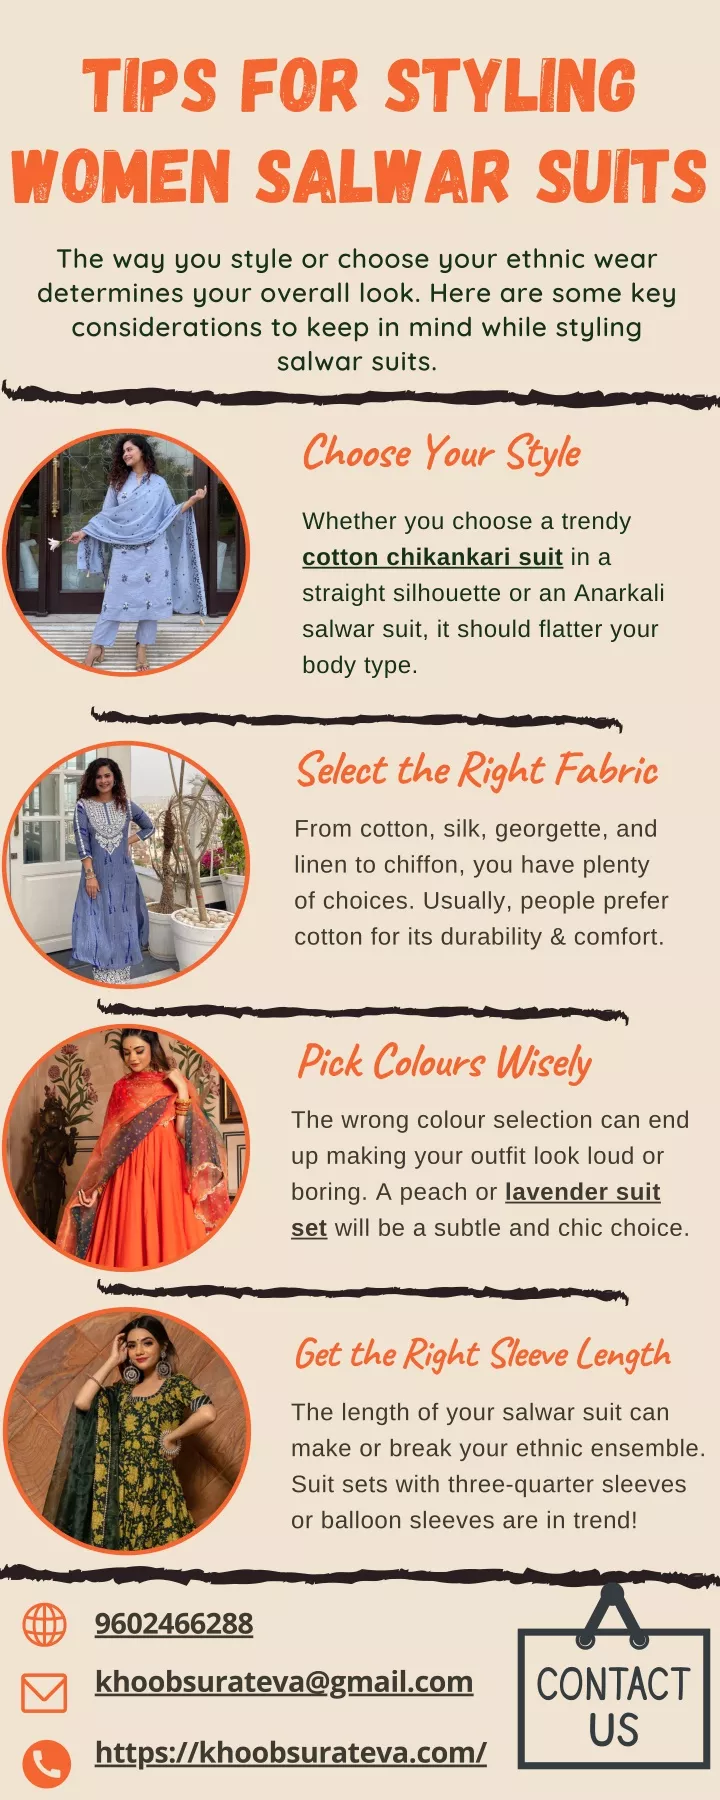 tips for styling women salwar suits